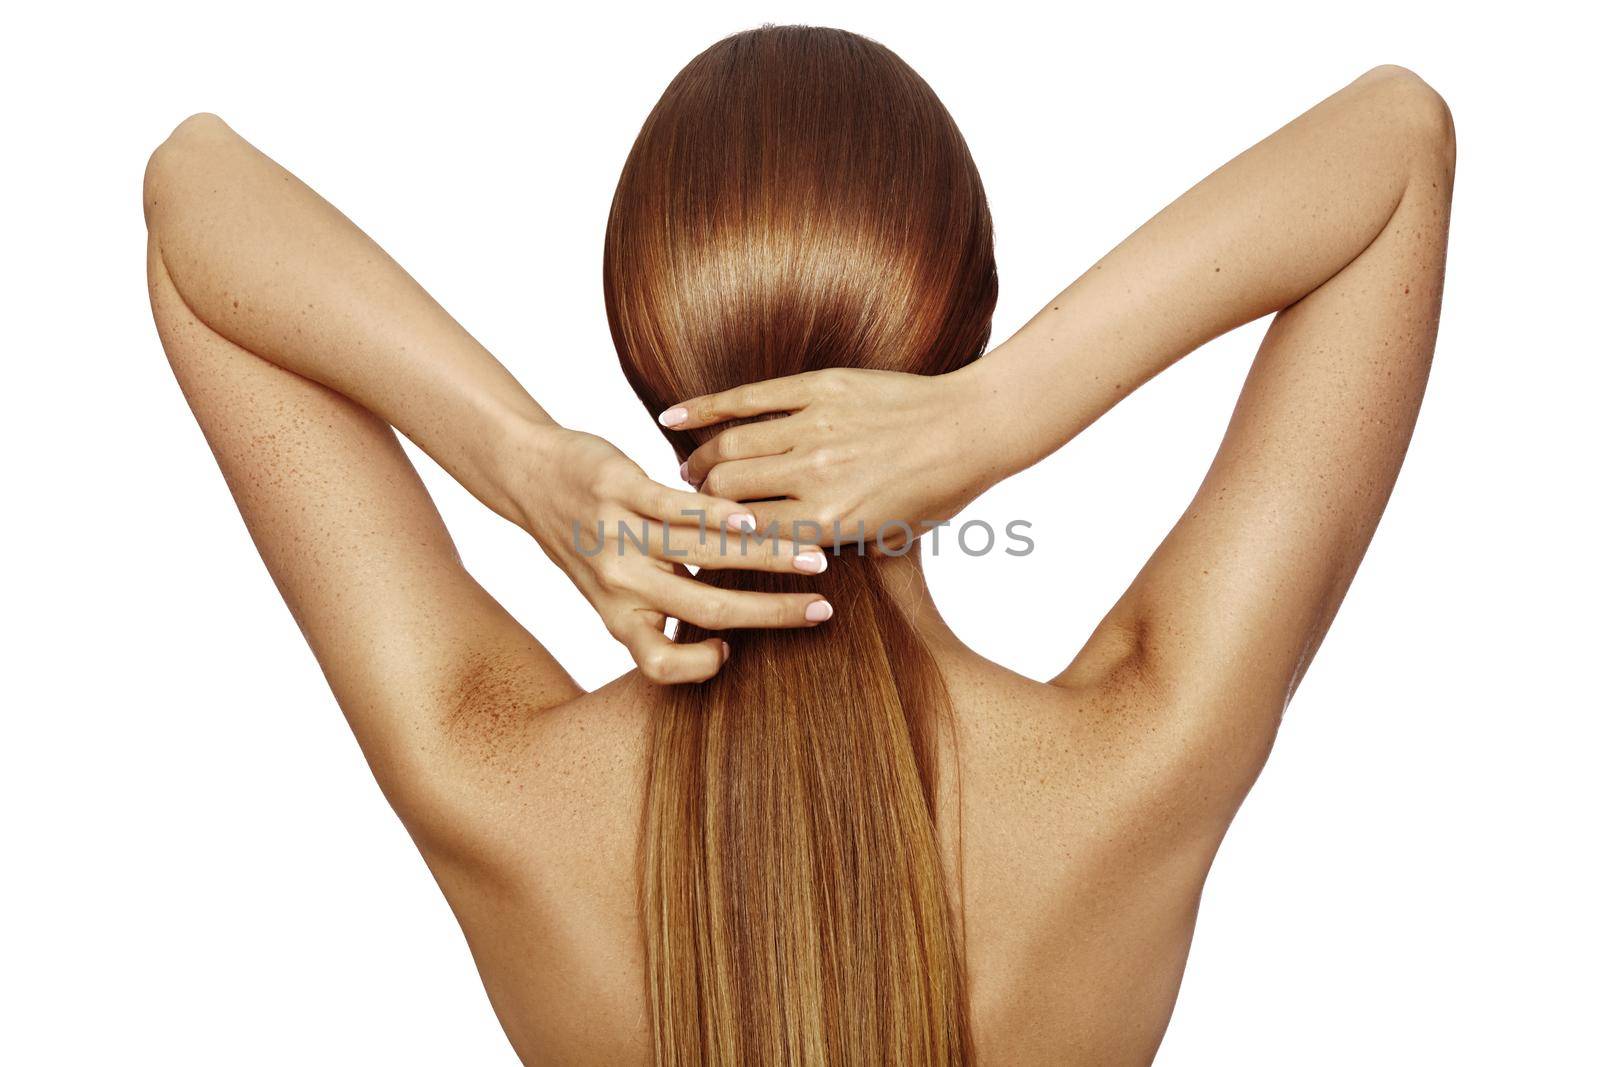 Healthy Shiny Long Hair in Tale. Beautiful Girl holding her Hair in hand. Back view on white. Smooth Hairstyle with strong Hair